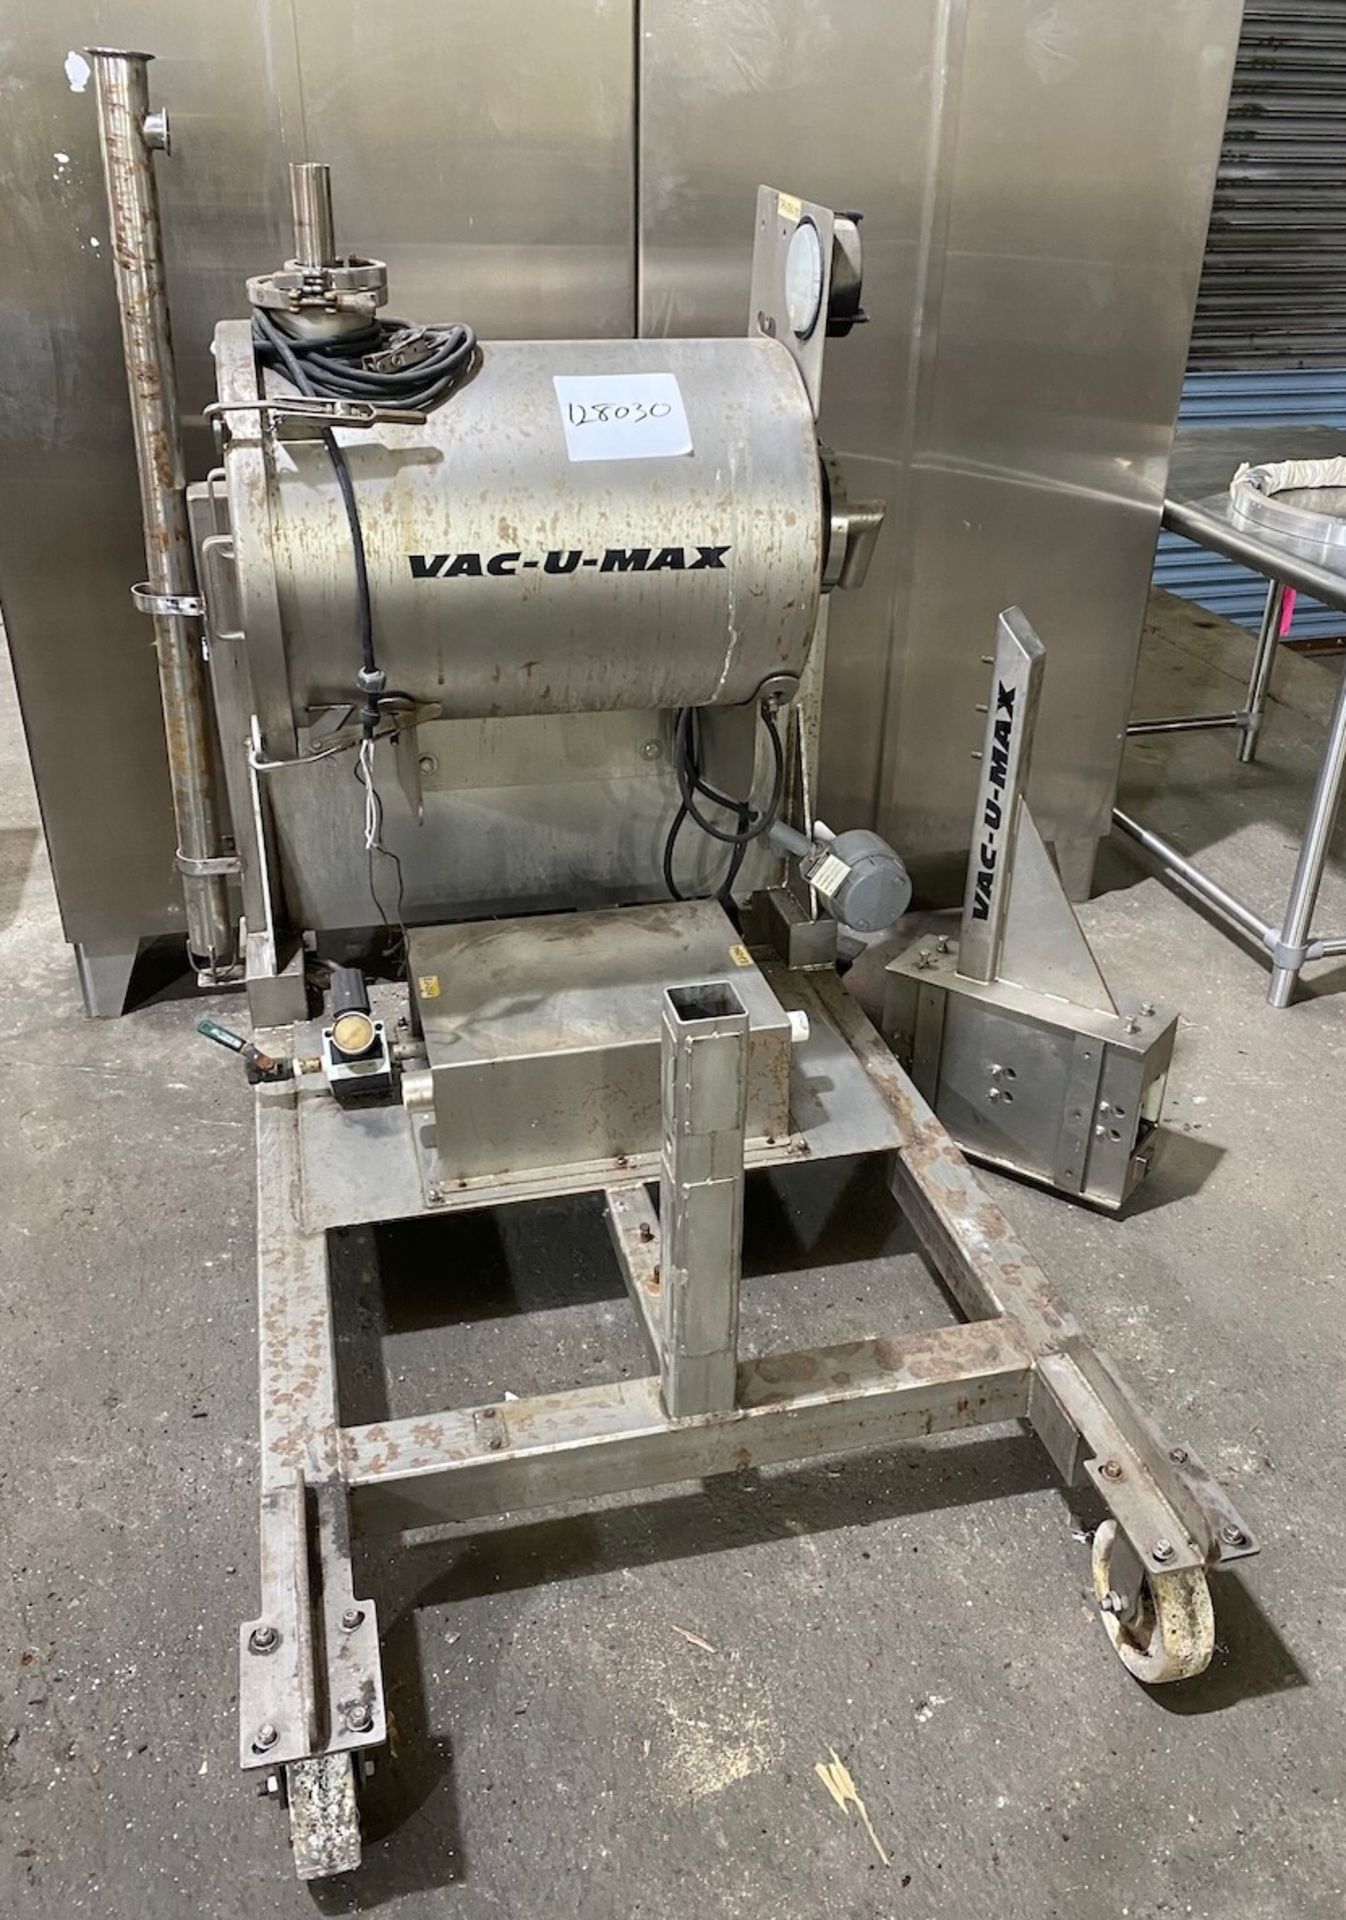 Vac-U-Max Stainless components